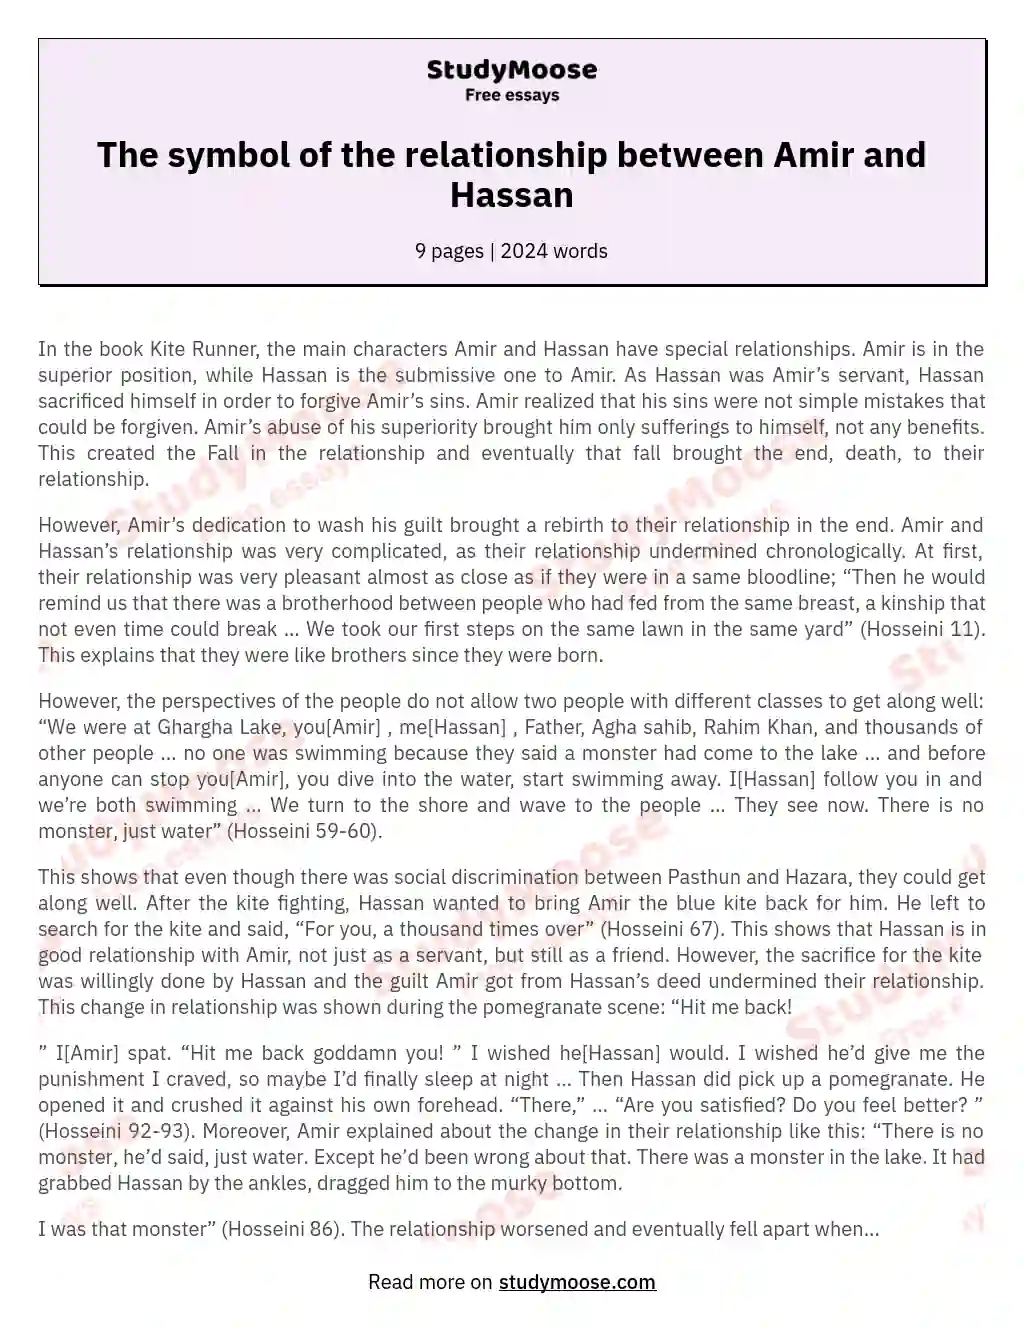 The symbol of the relationship between Amir and Hassan essay